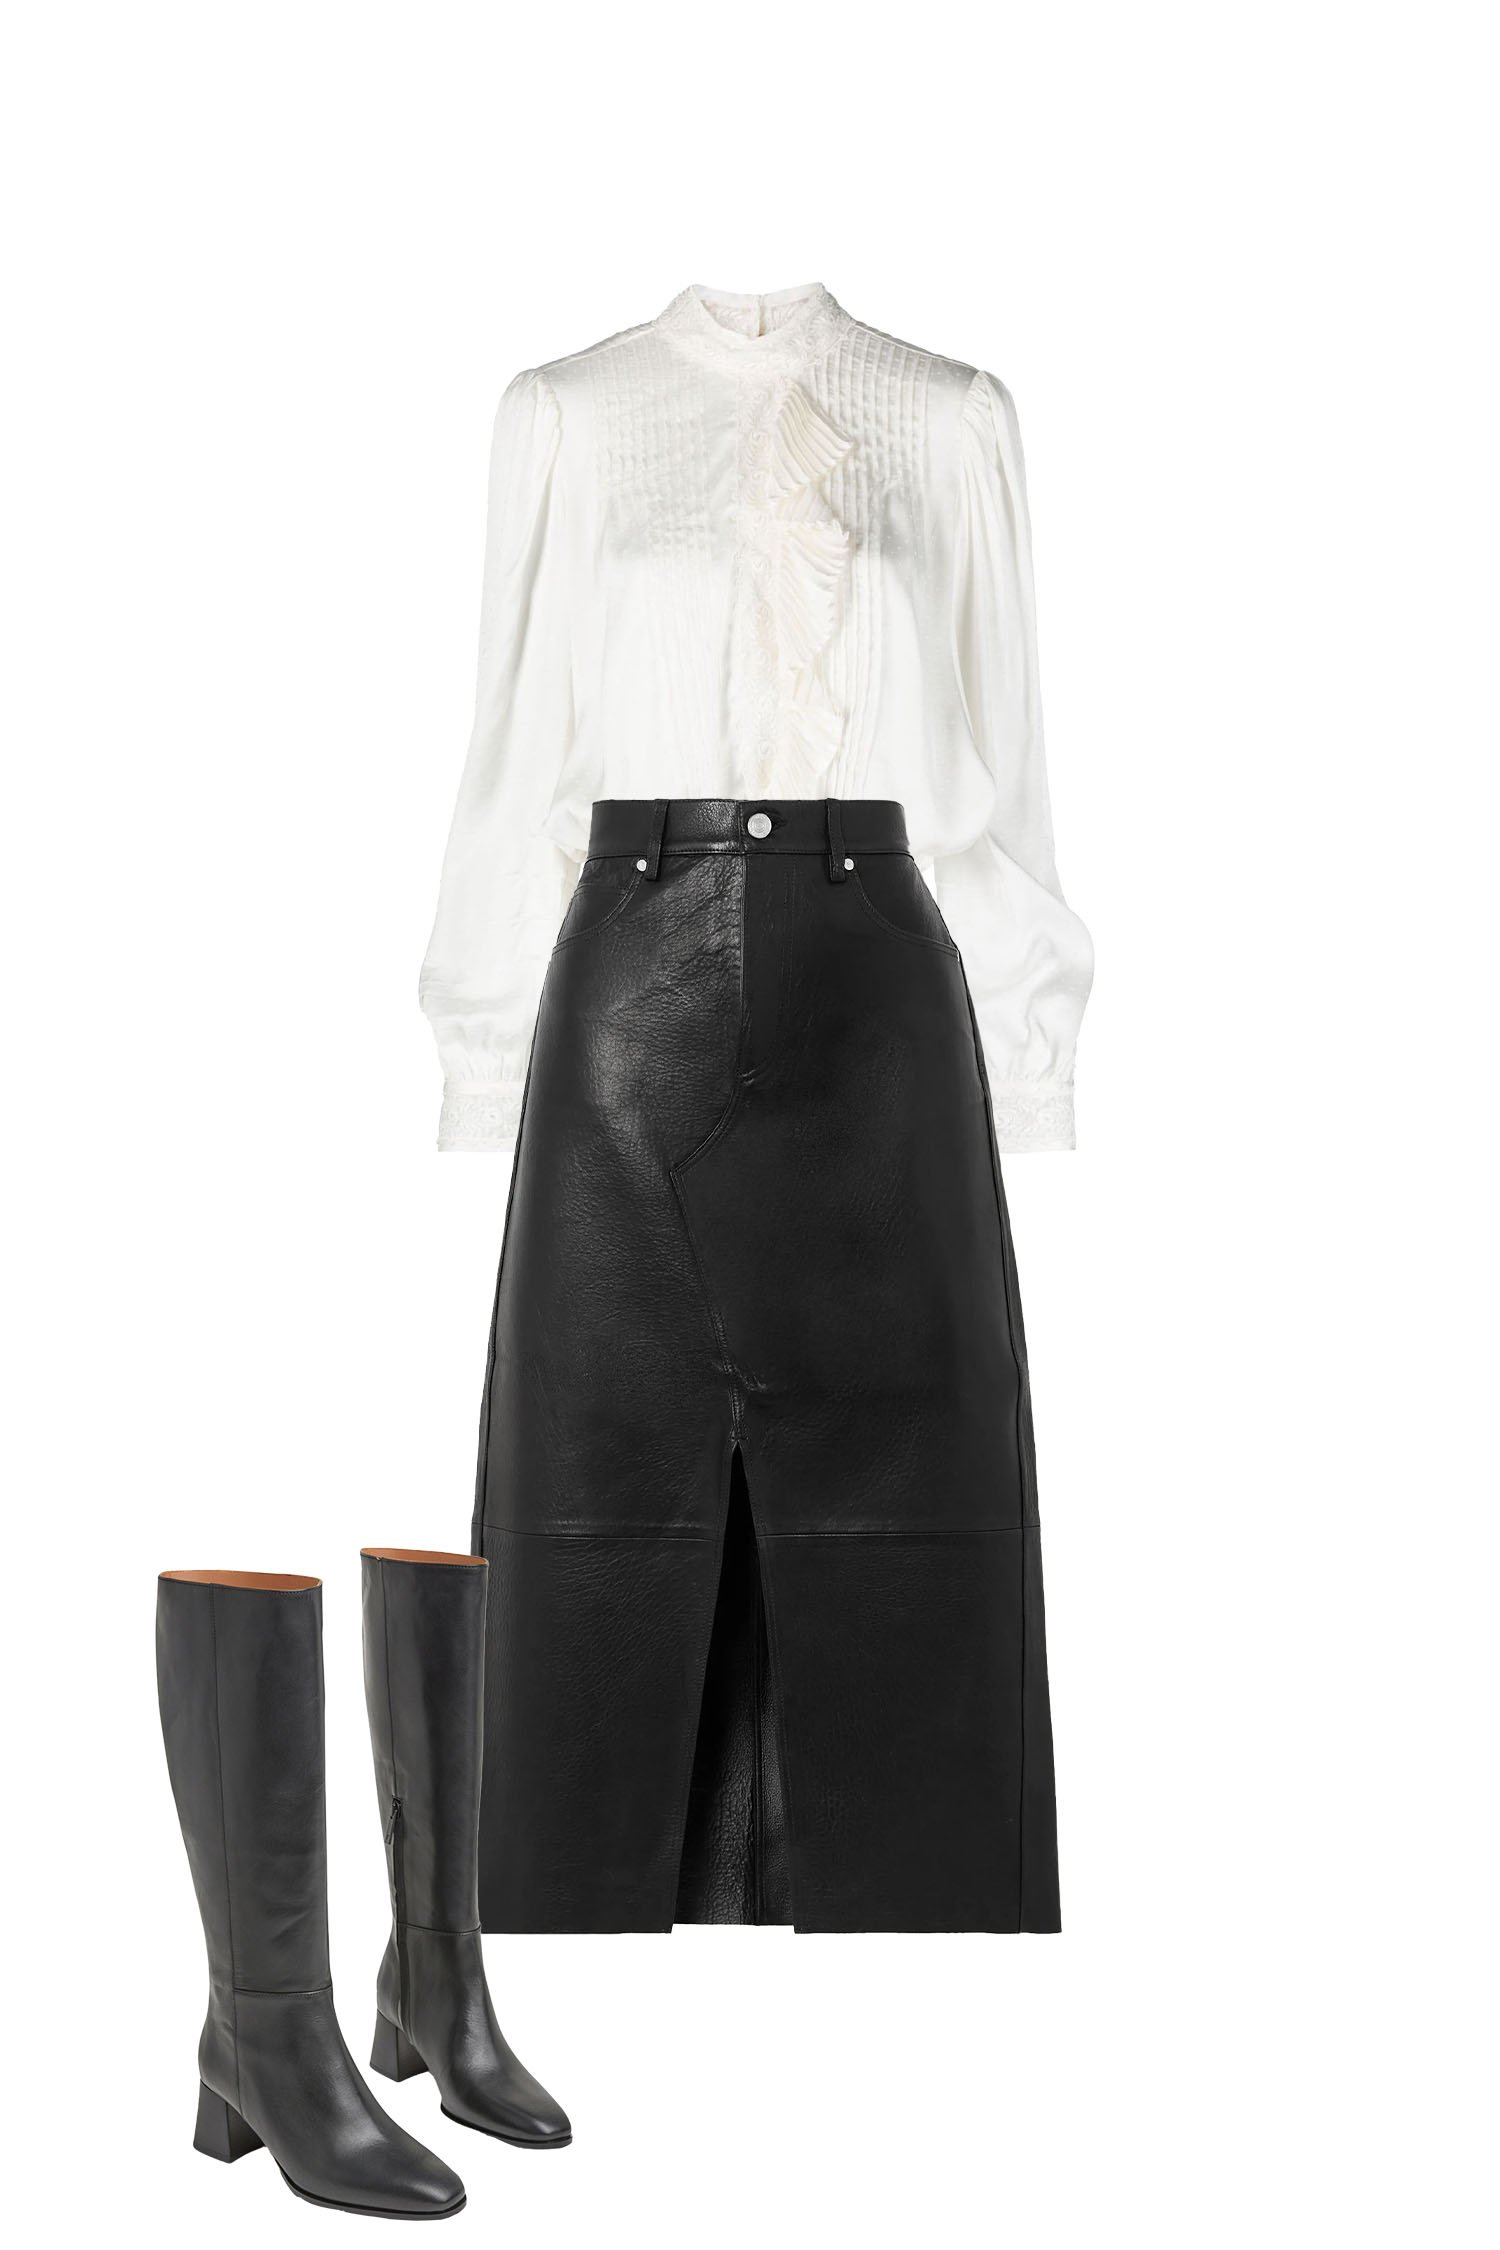 Black Leather Midi Skirt Outfit with White Ruffle and Lace Blouse, and Black Knee High Boots